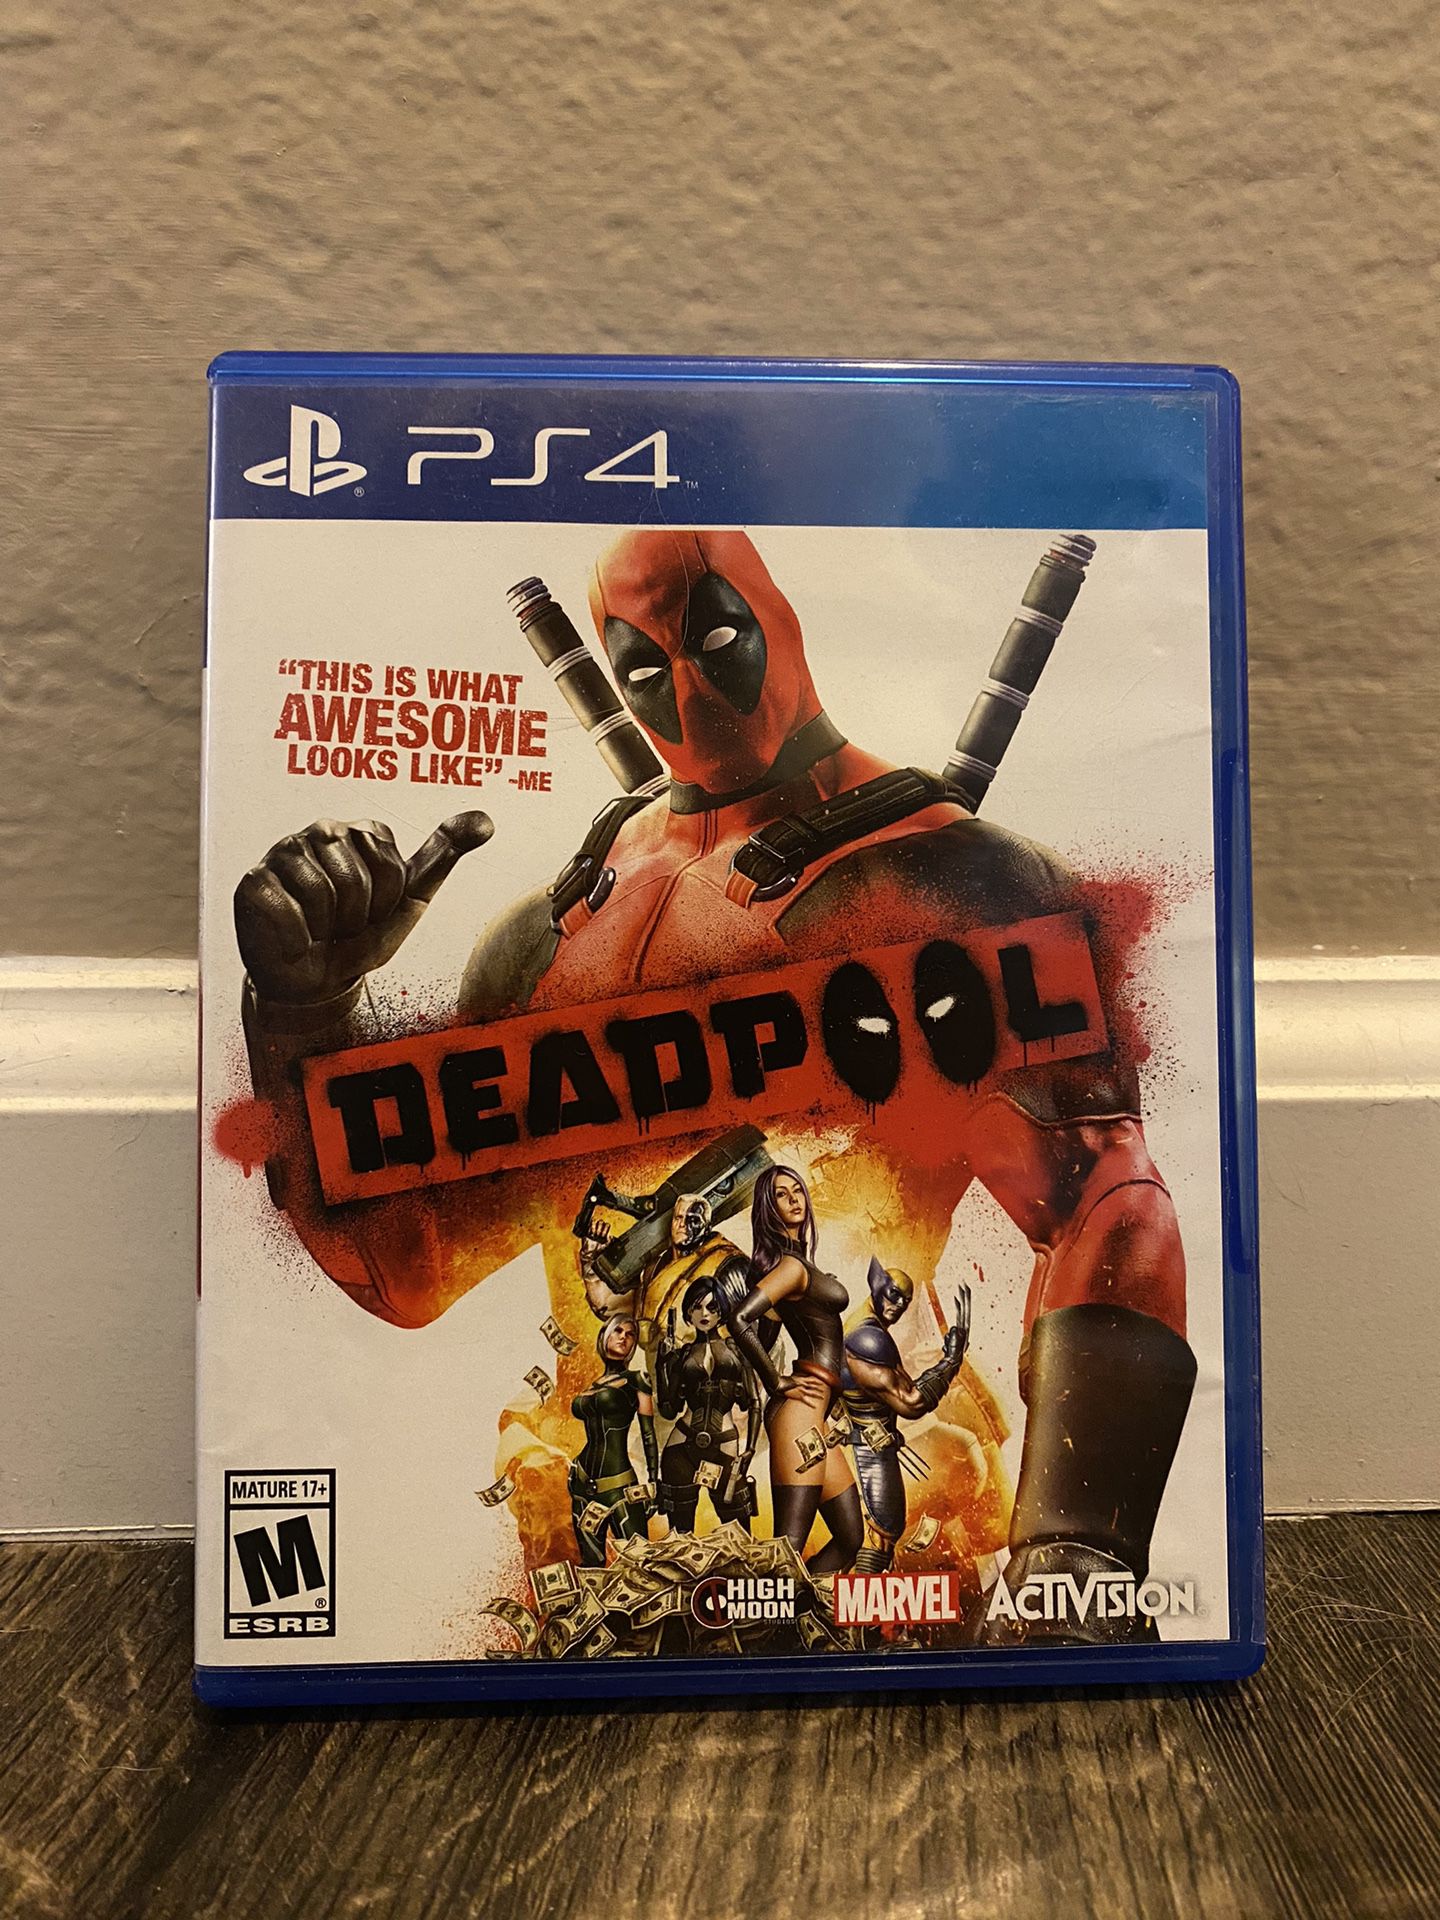 PS4 Deadpool Game ( Sony PlayStation 4, 2015)